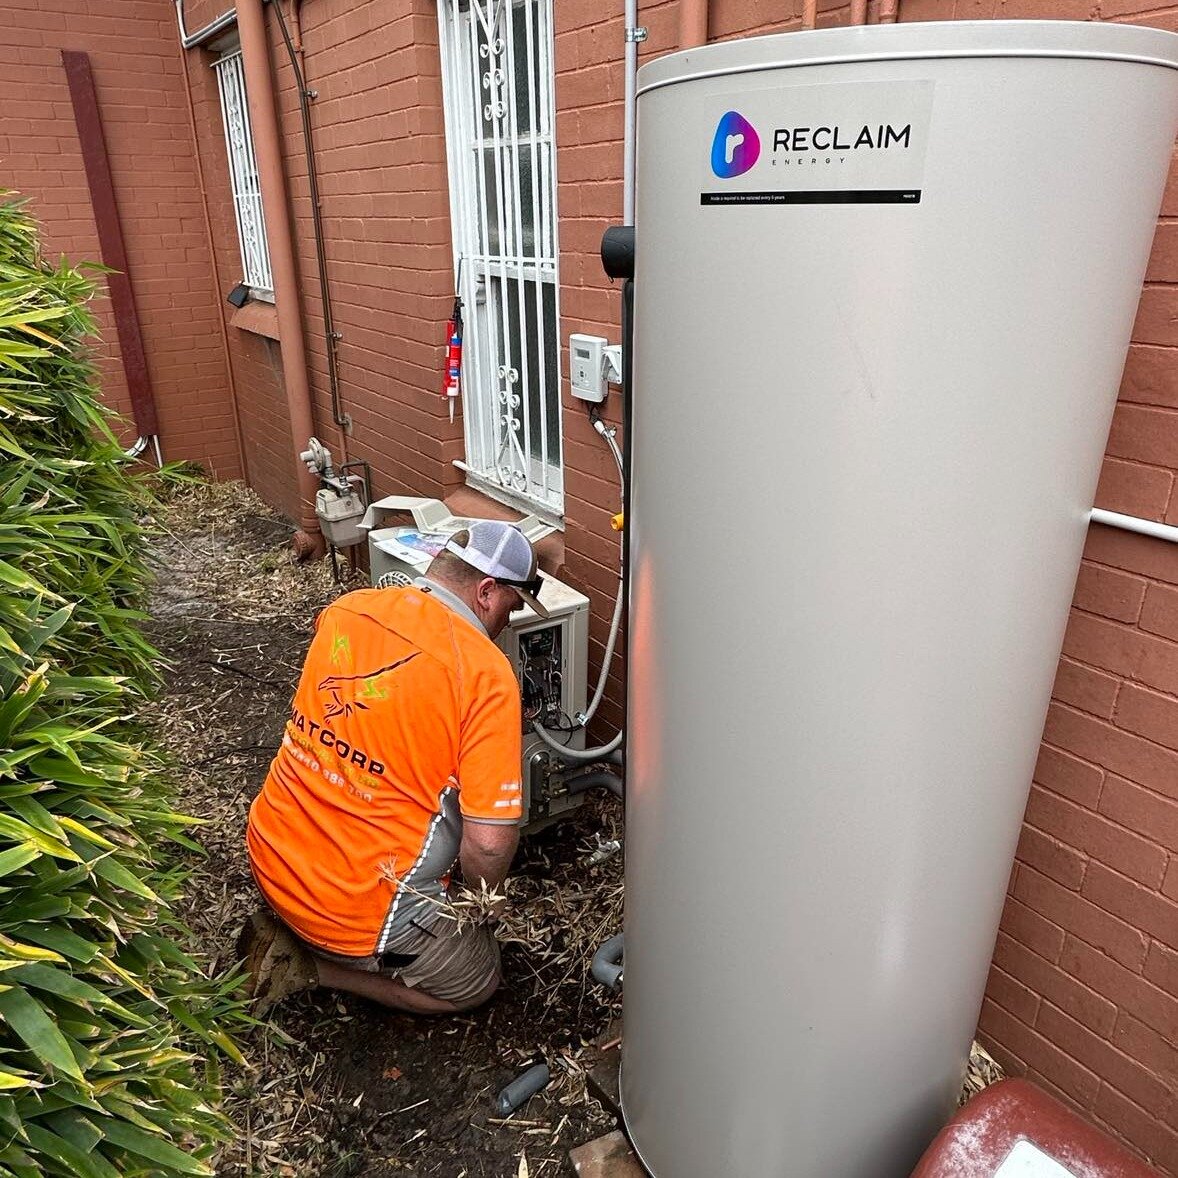 Installation of Energy Efficient Heat Pump to reduce power consumption and replace old Hot Water System. 
#reclaimhotwaterheatpump #goodearthgroup #electrician #powerconsumption #energyeffiency